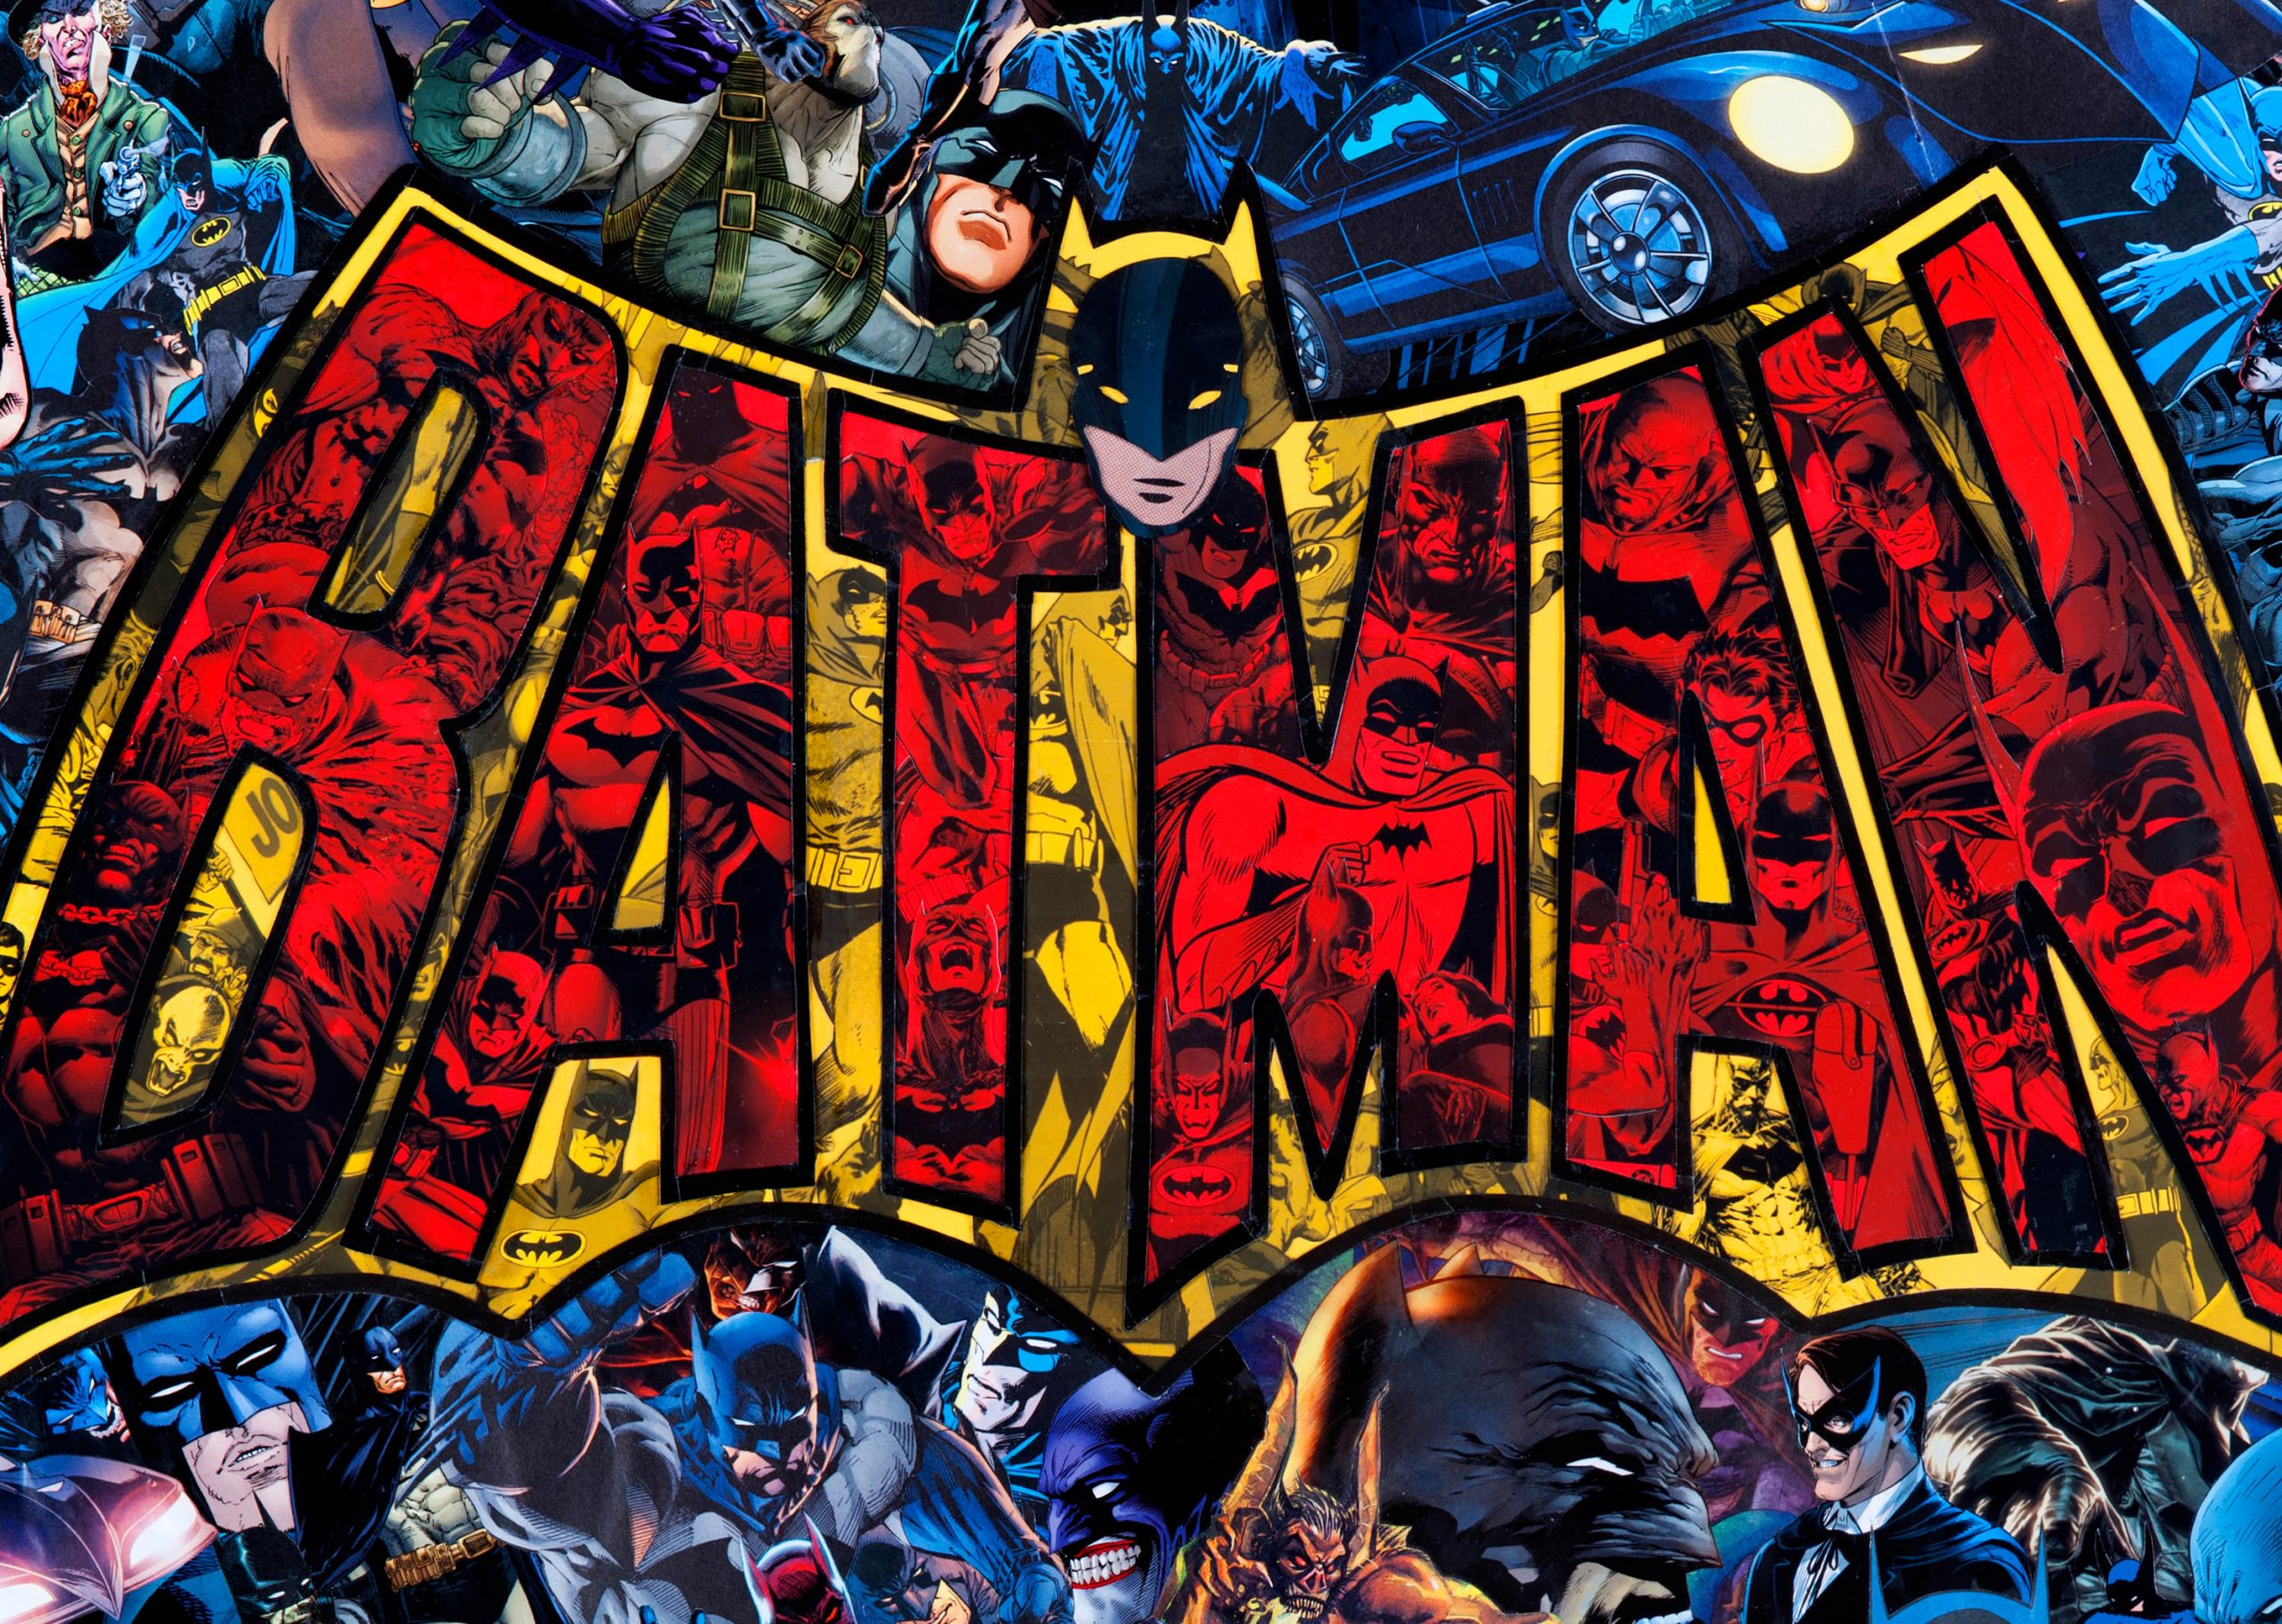 HBO Max celebrates Batman Day with live-action and animated content September 18-19